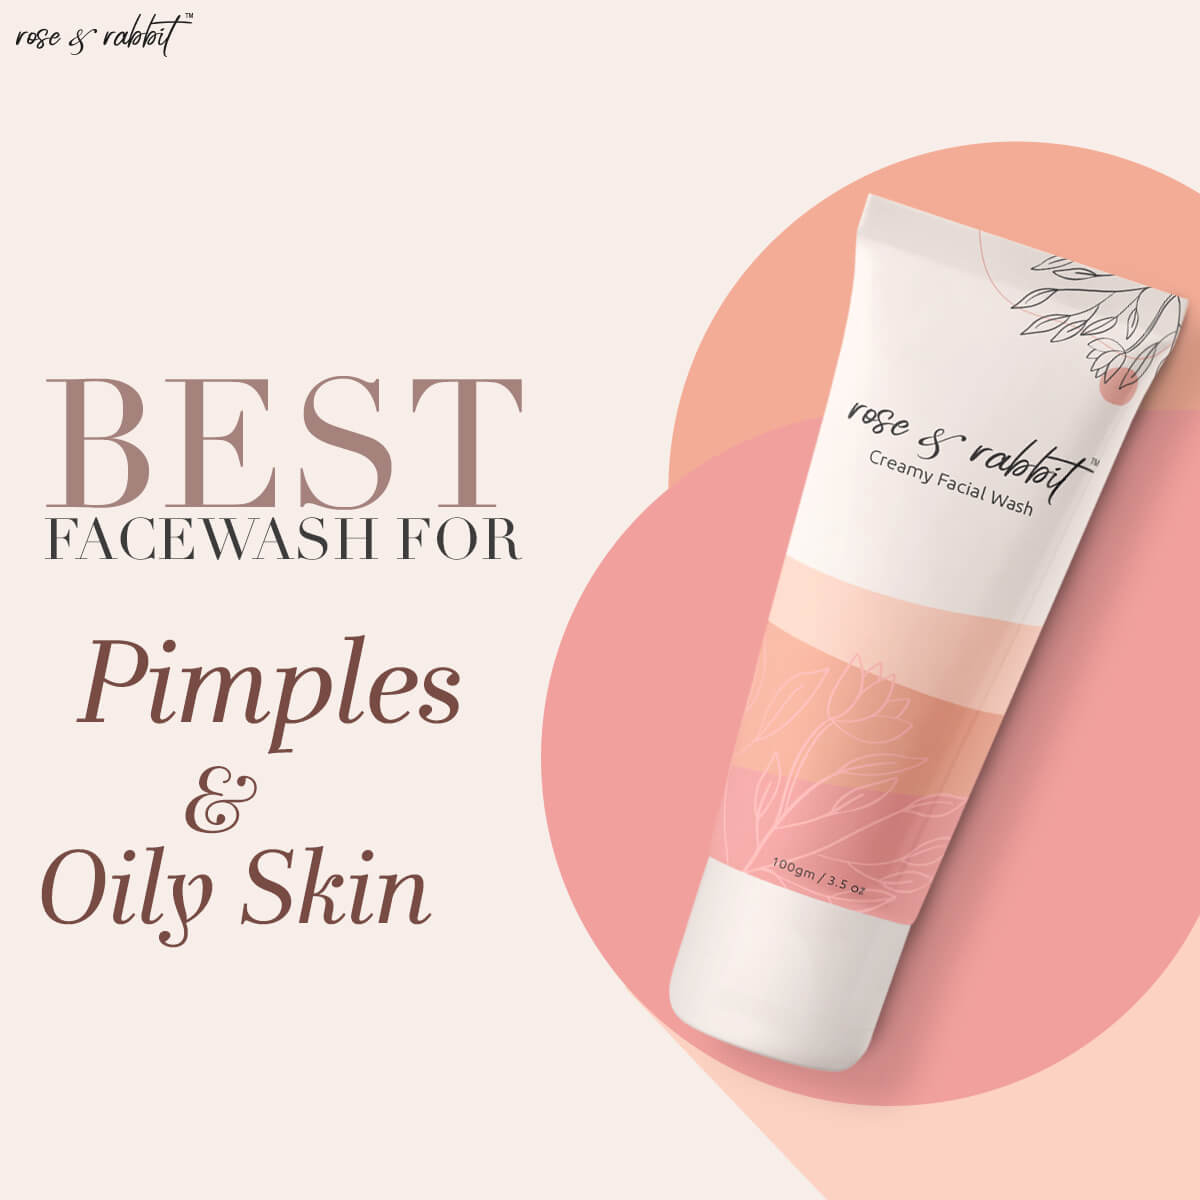 Best Facewash for Pimples and Oily Skin